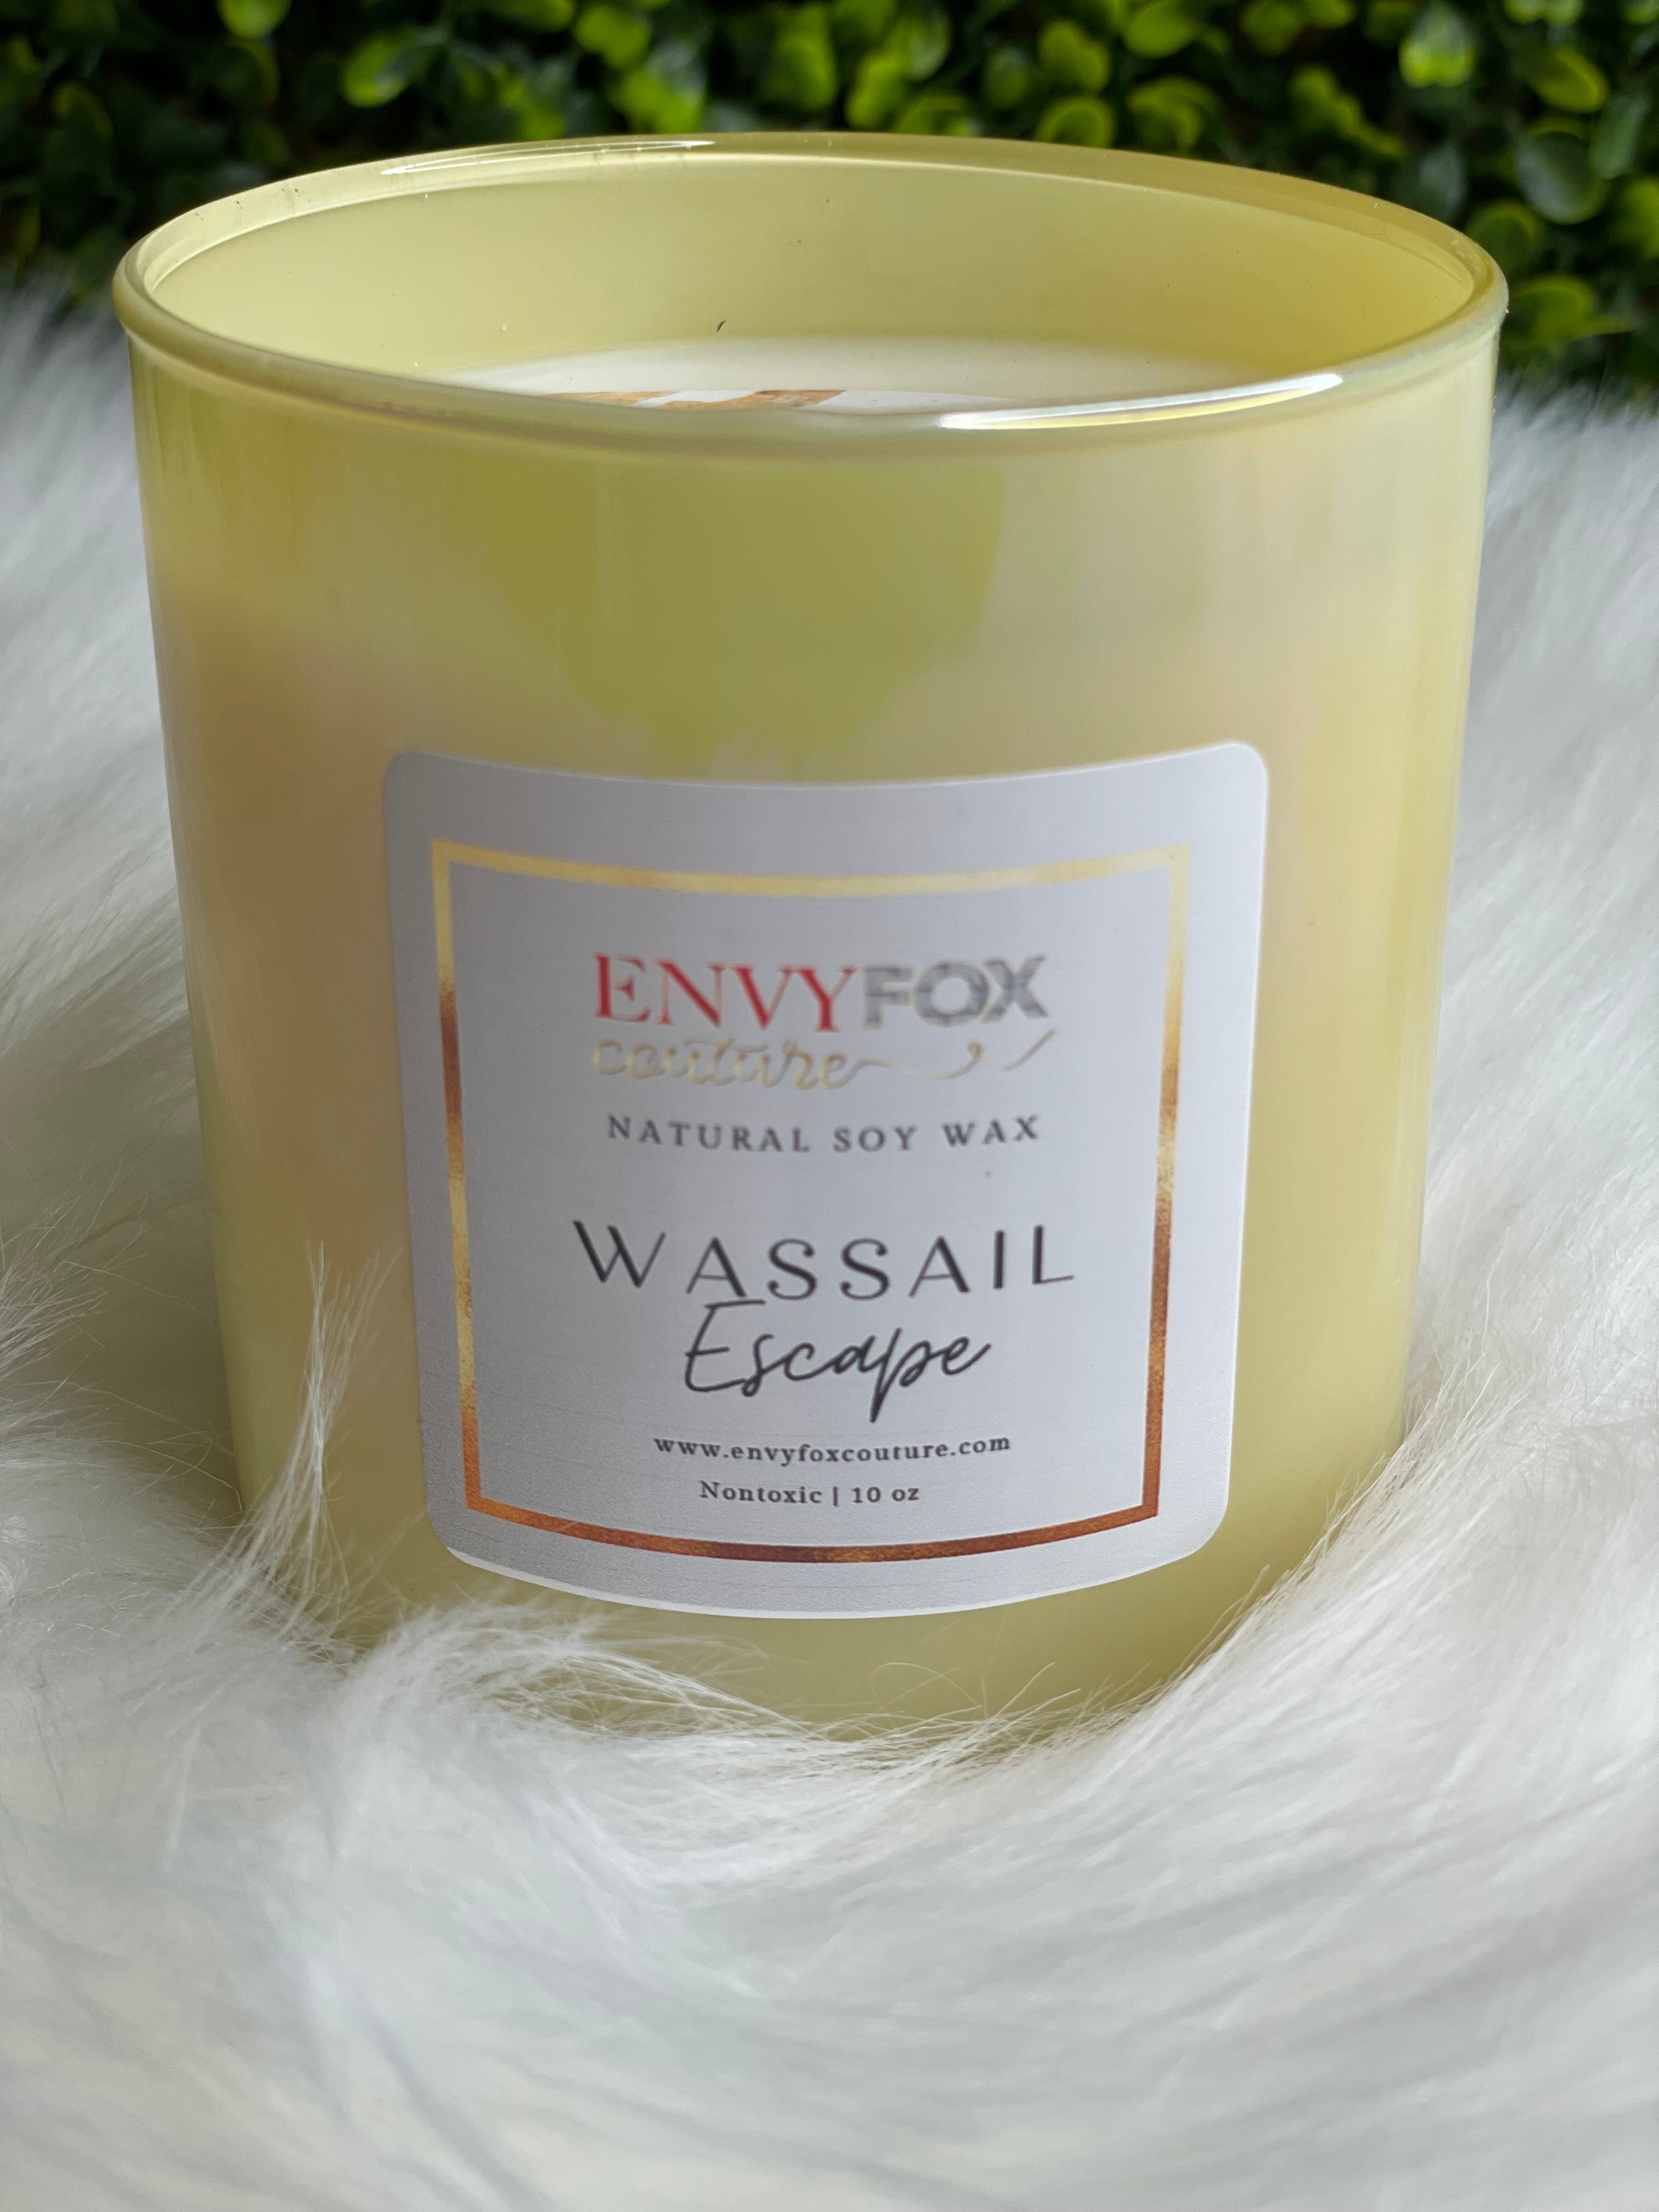 Wassail Escape 10 oz Natural Soy Wax Candle